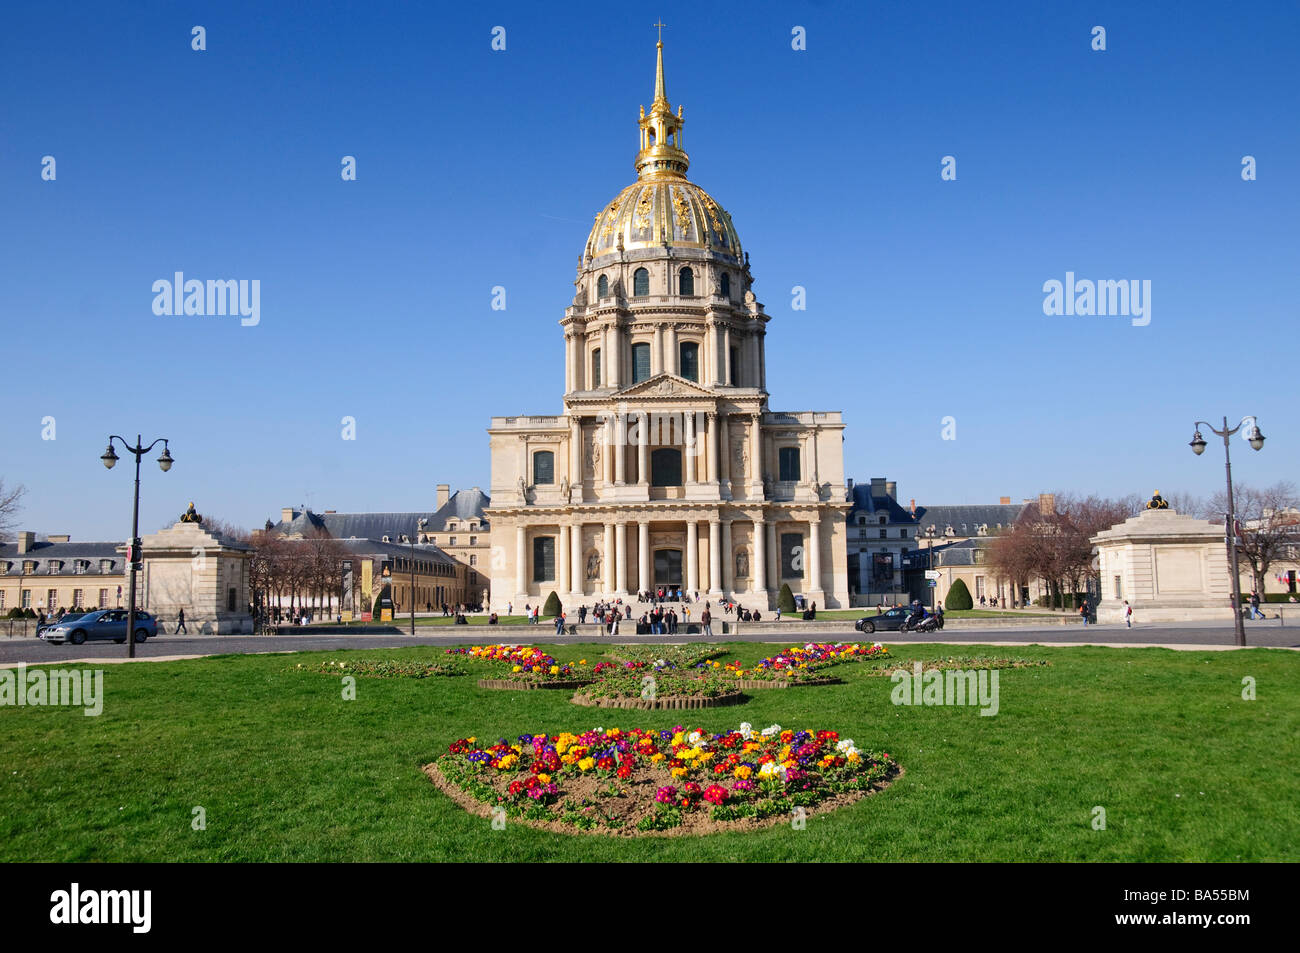 PARIS, France - Les Invalides, near the Eiffel Tower, in Paris. It is best known as containing the tomb of Napolean Bonaparte. Stock Photo